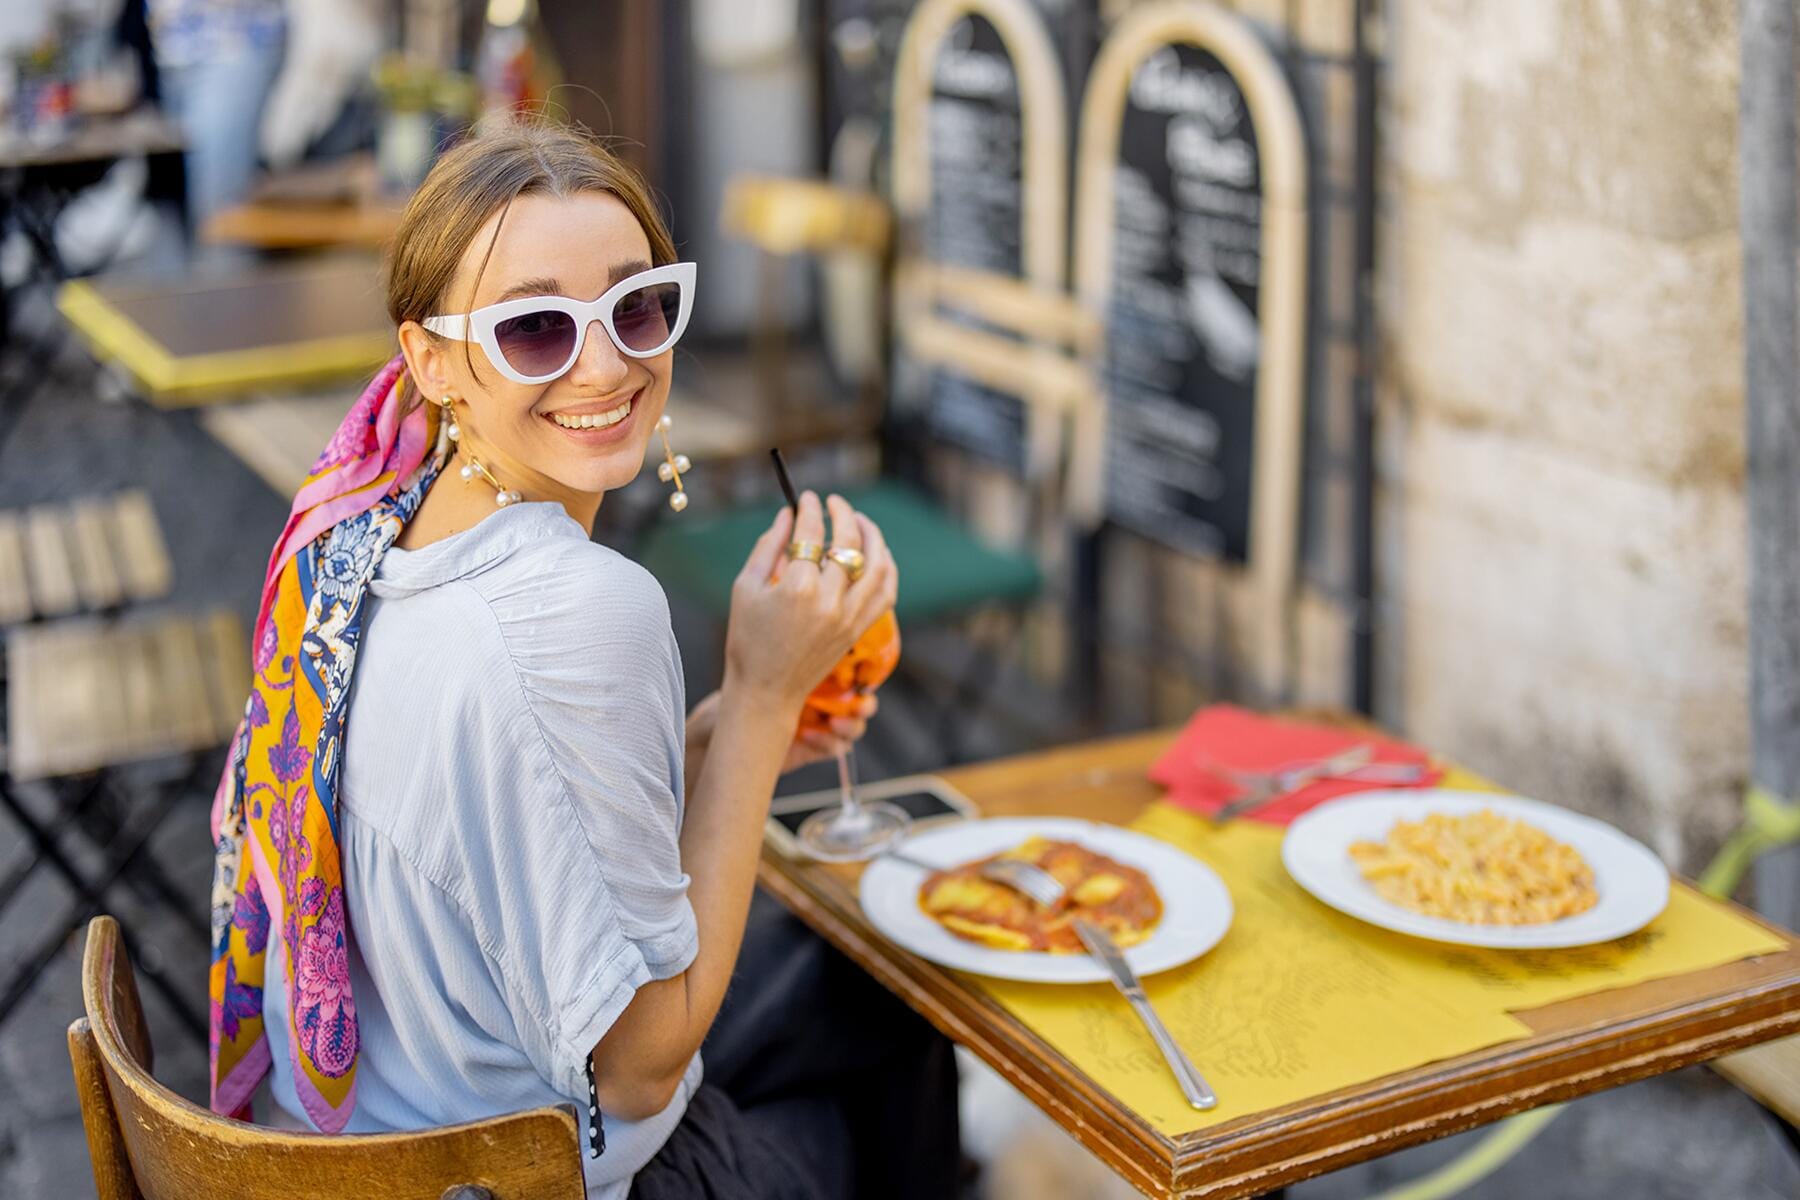 a-travelers-gotta-eat-right-how-to-cut-costs-on-food-on-the-road